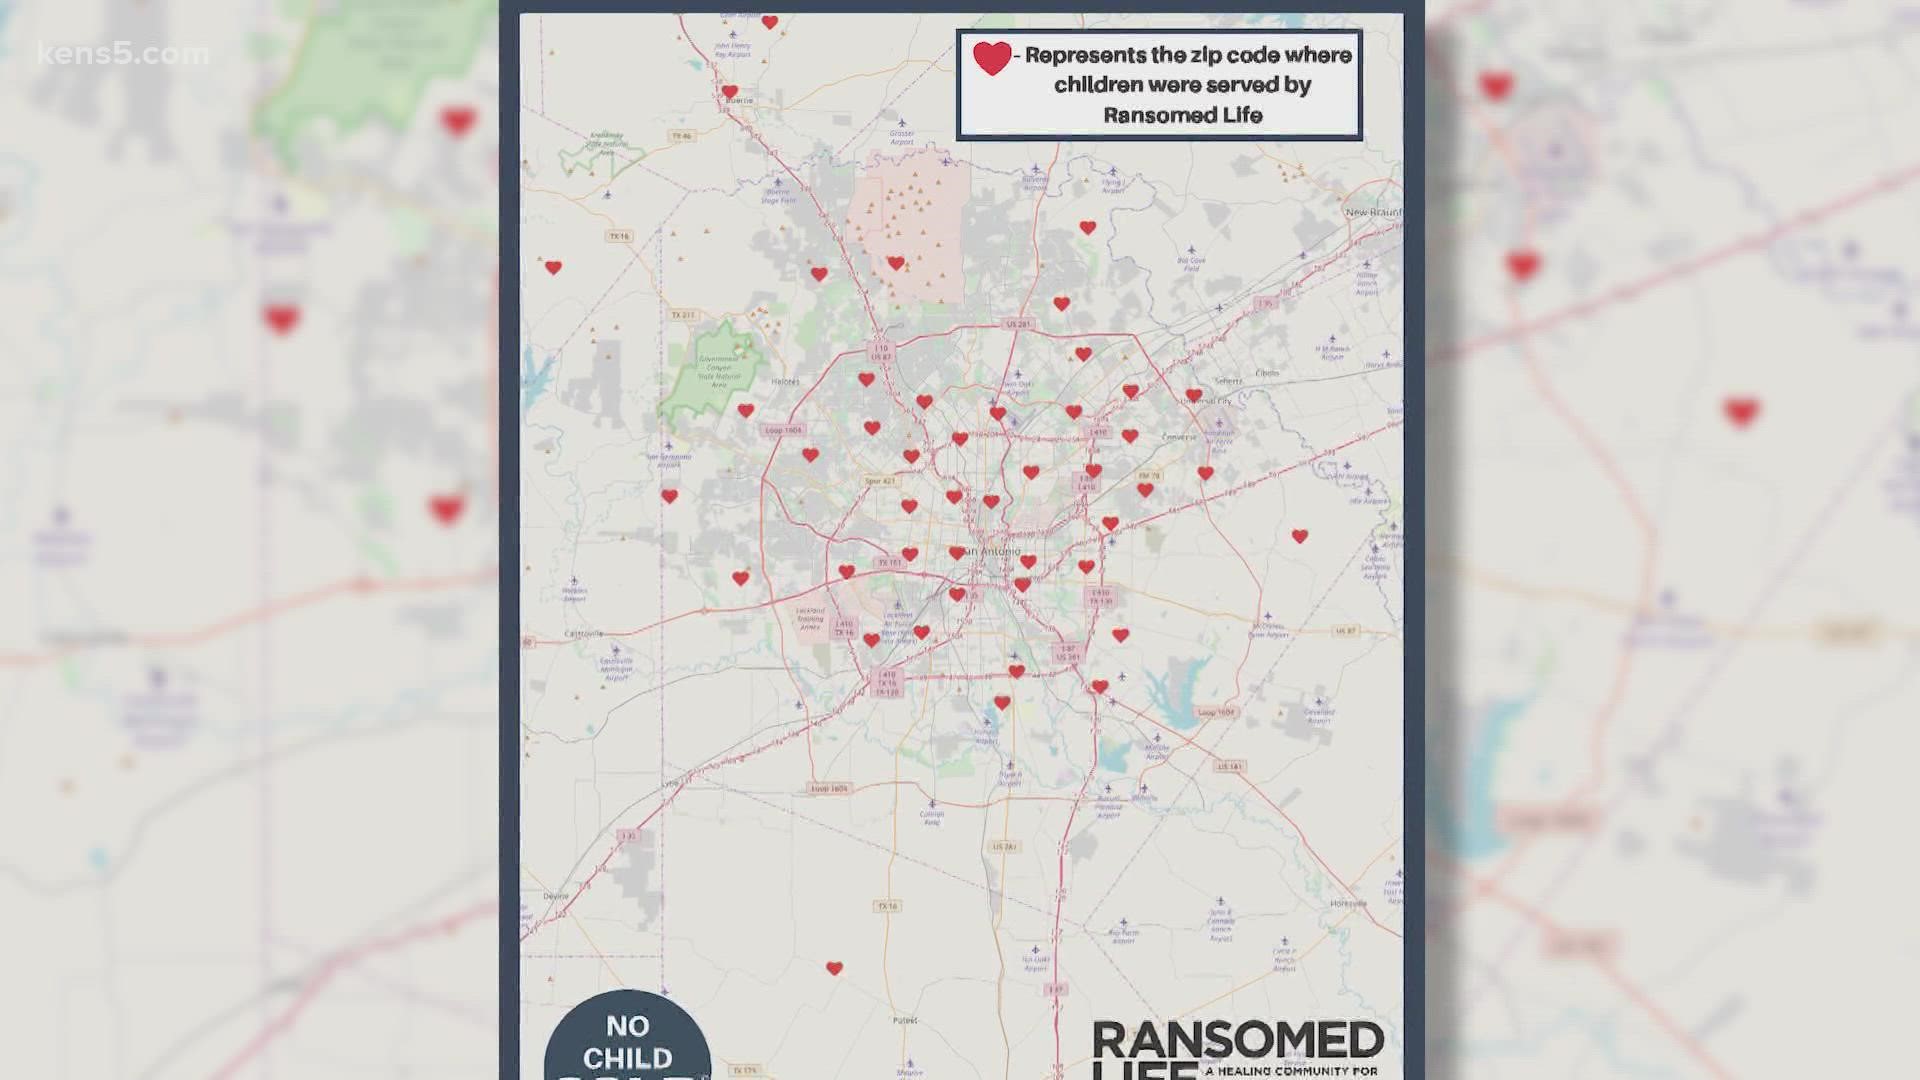 The map is part of Ransomed Life's new campaign: No Child Sold. The organization is proving how prevalent child sex trafficking and exploitation is in San Antonio.